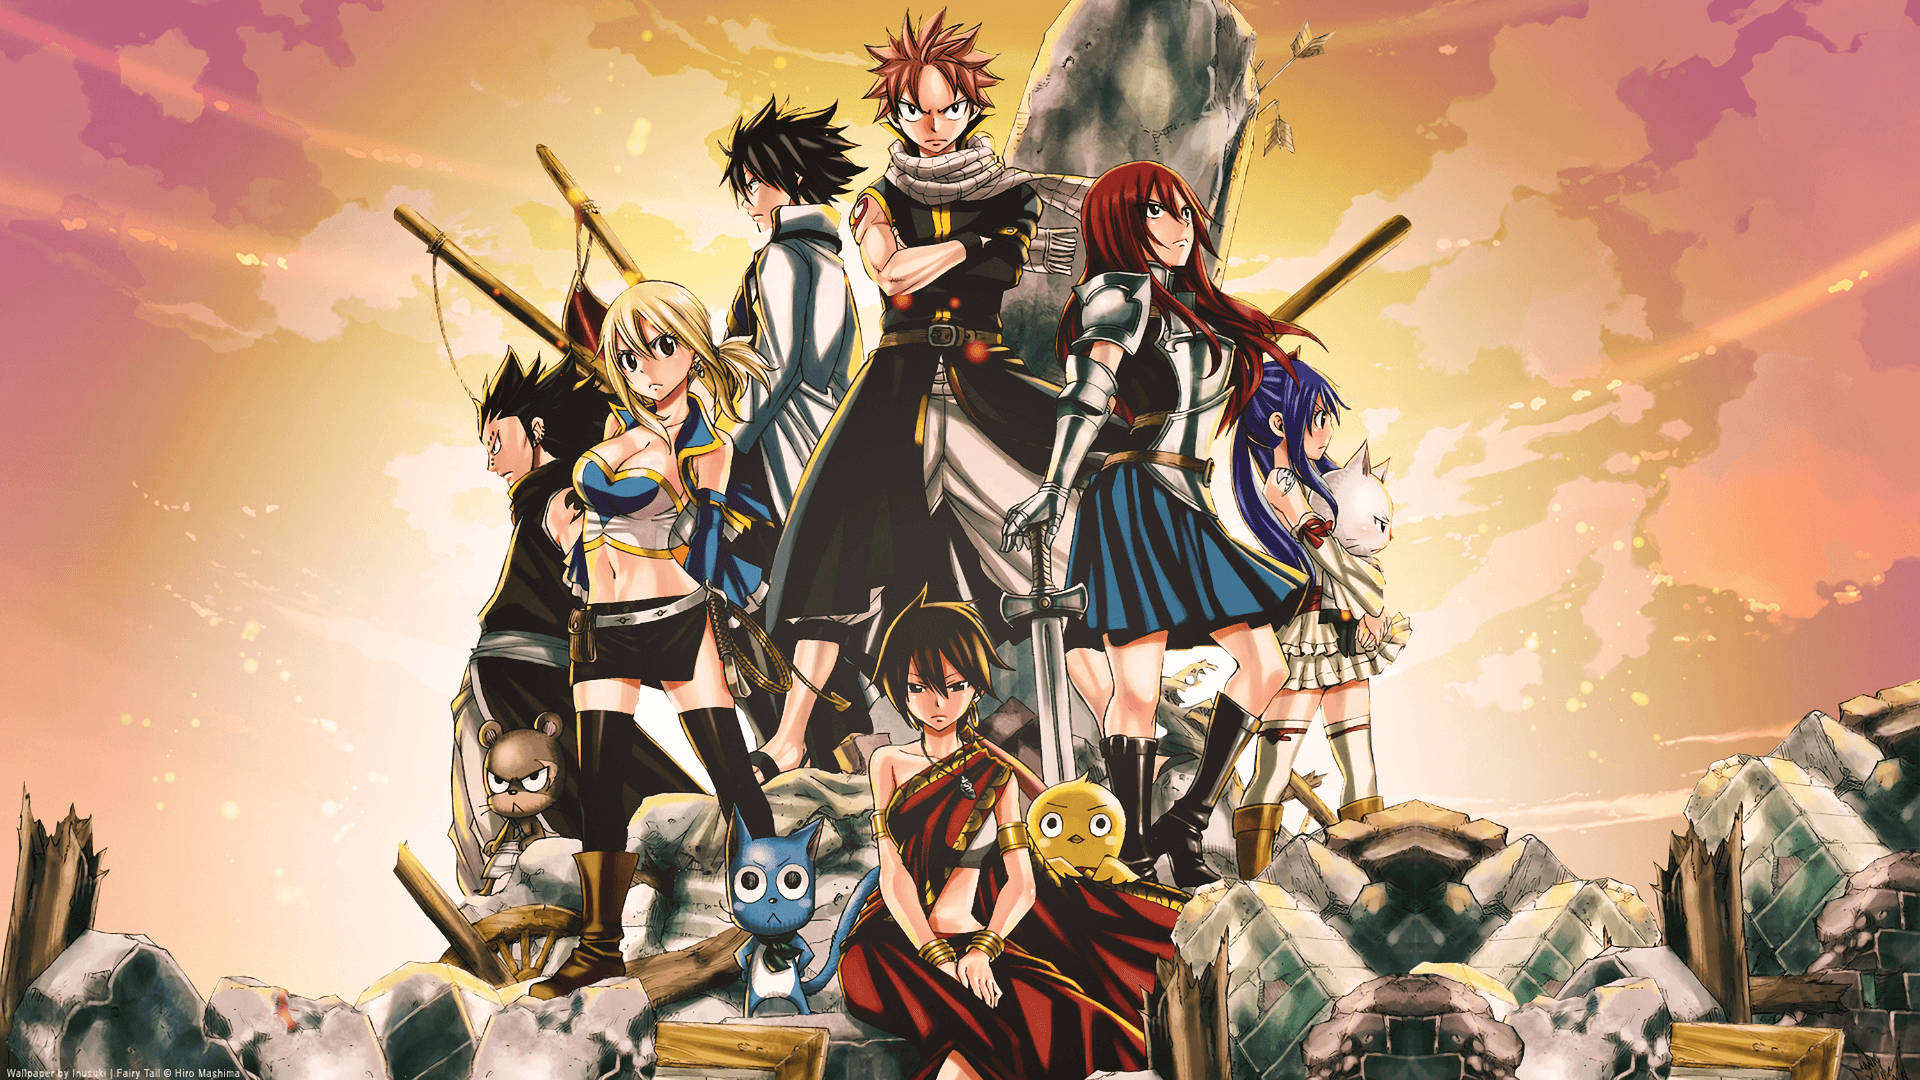 Top 999+ Fairy Tail Wallpapers Full HD, 4K✅Free to Use